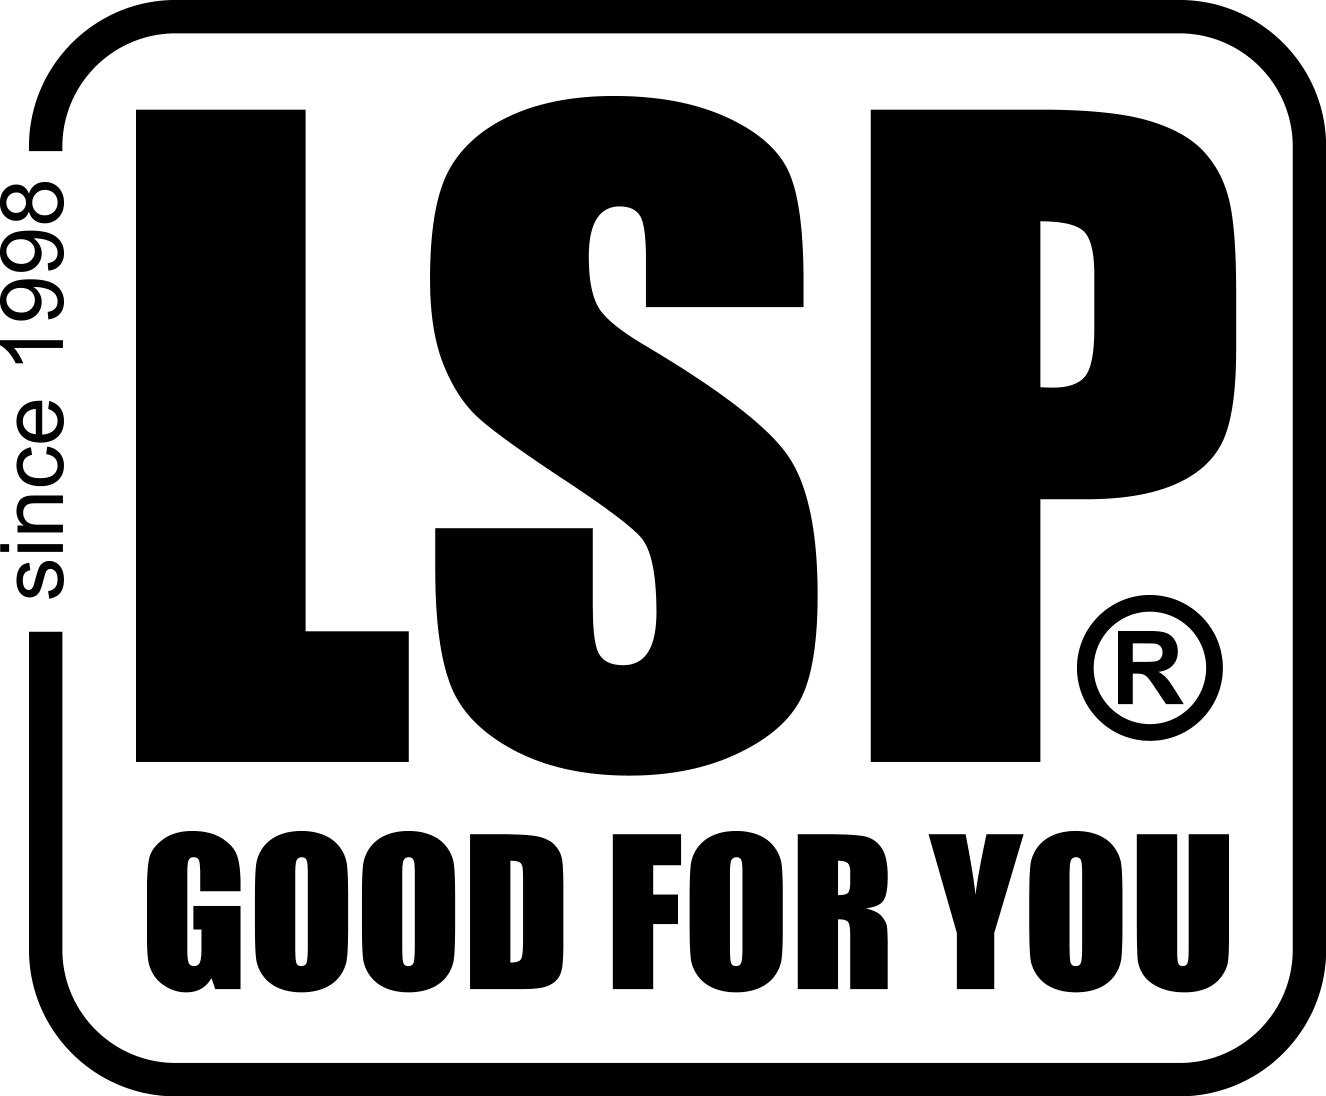 LSP Sports